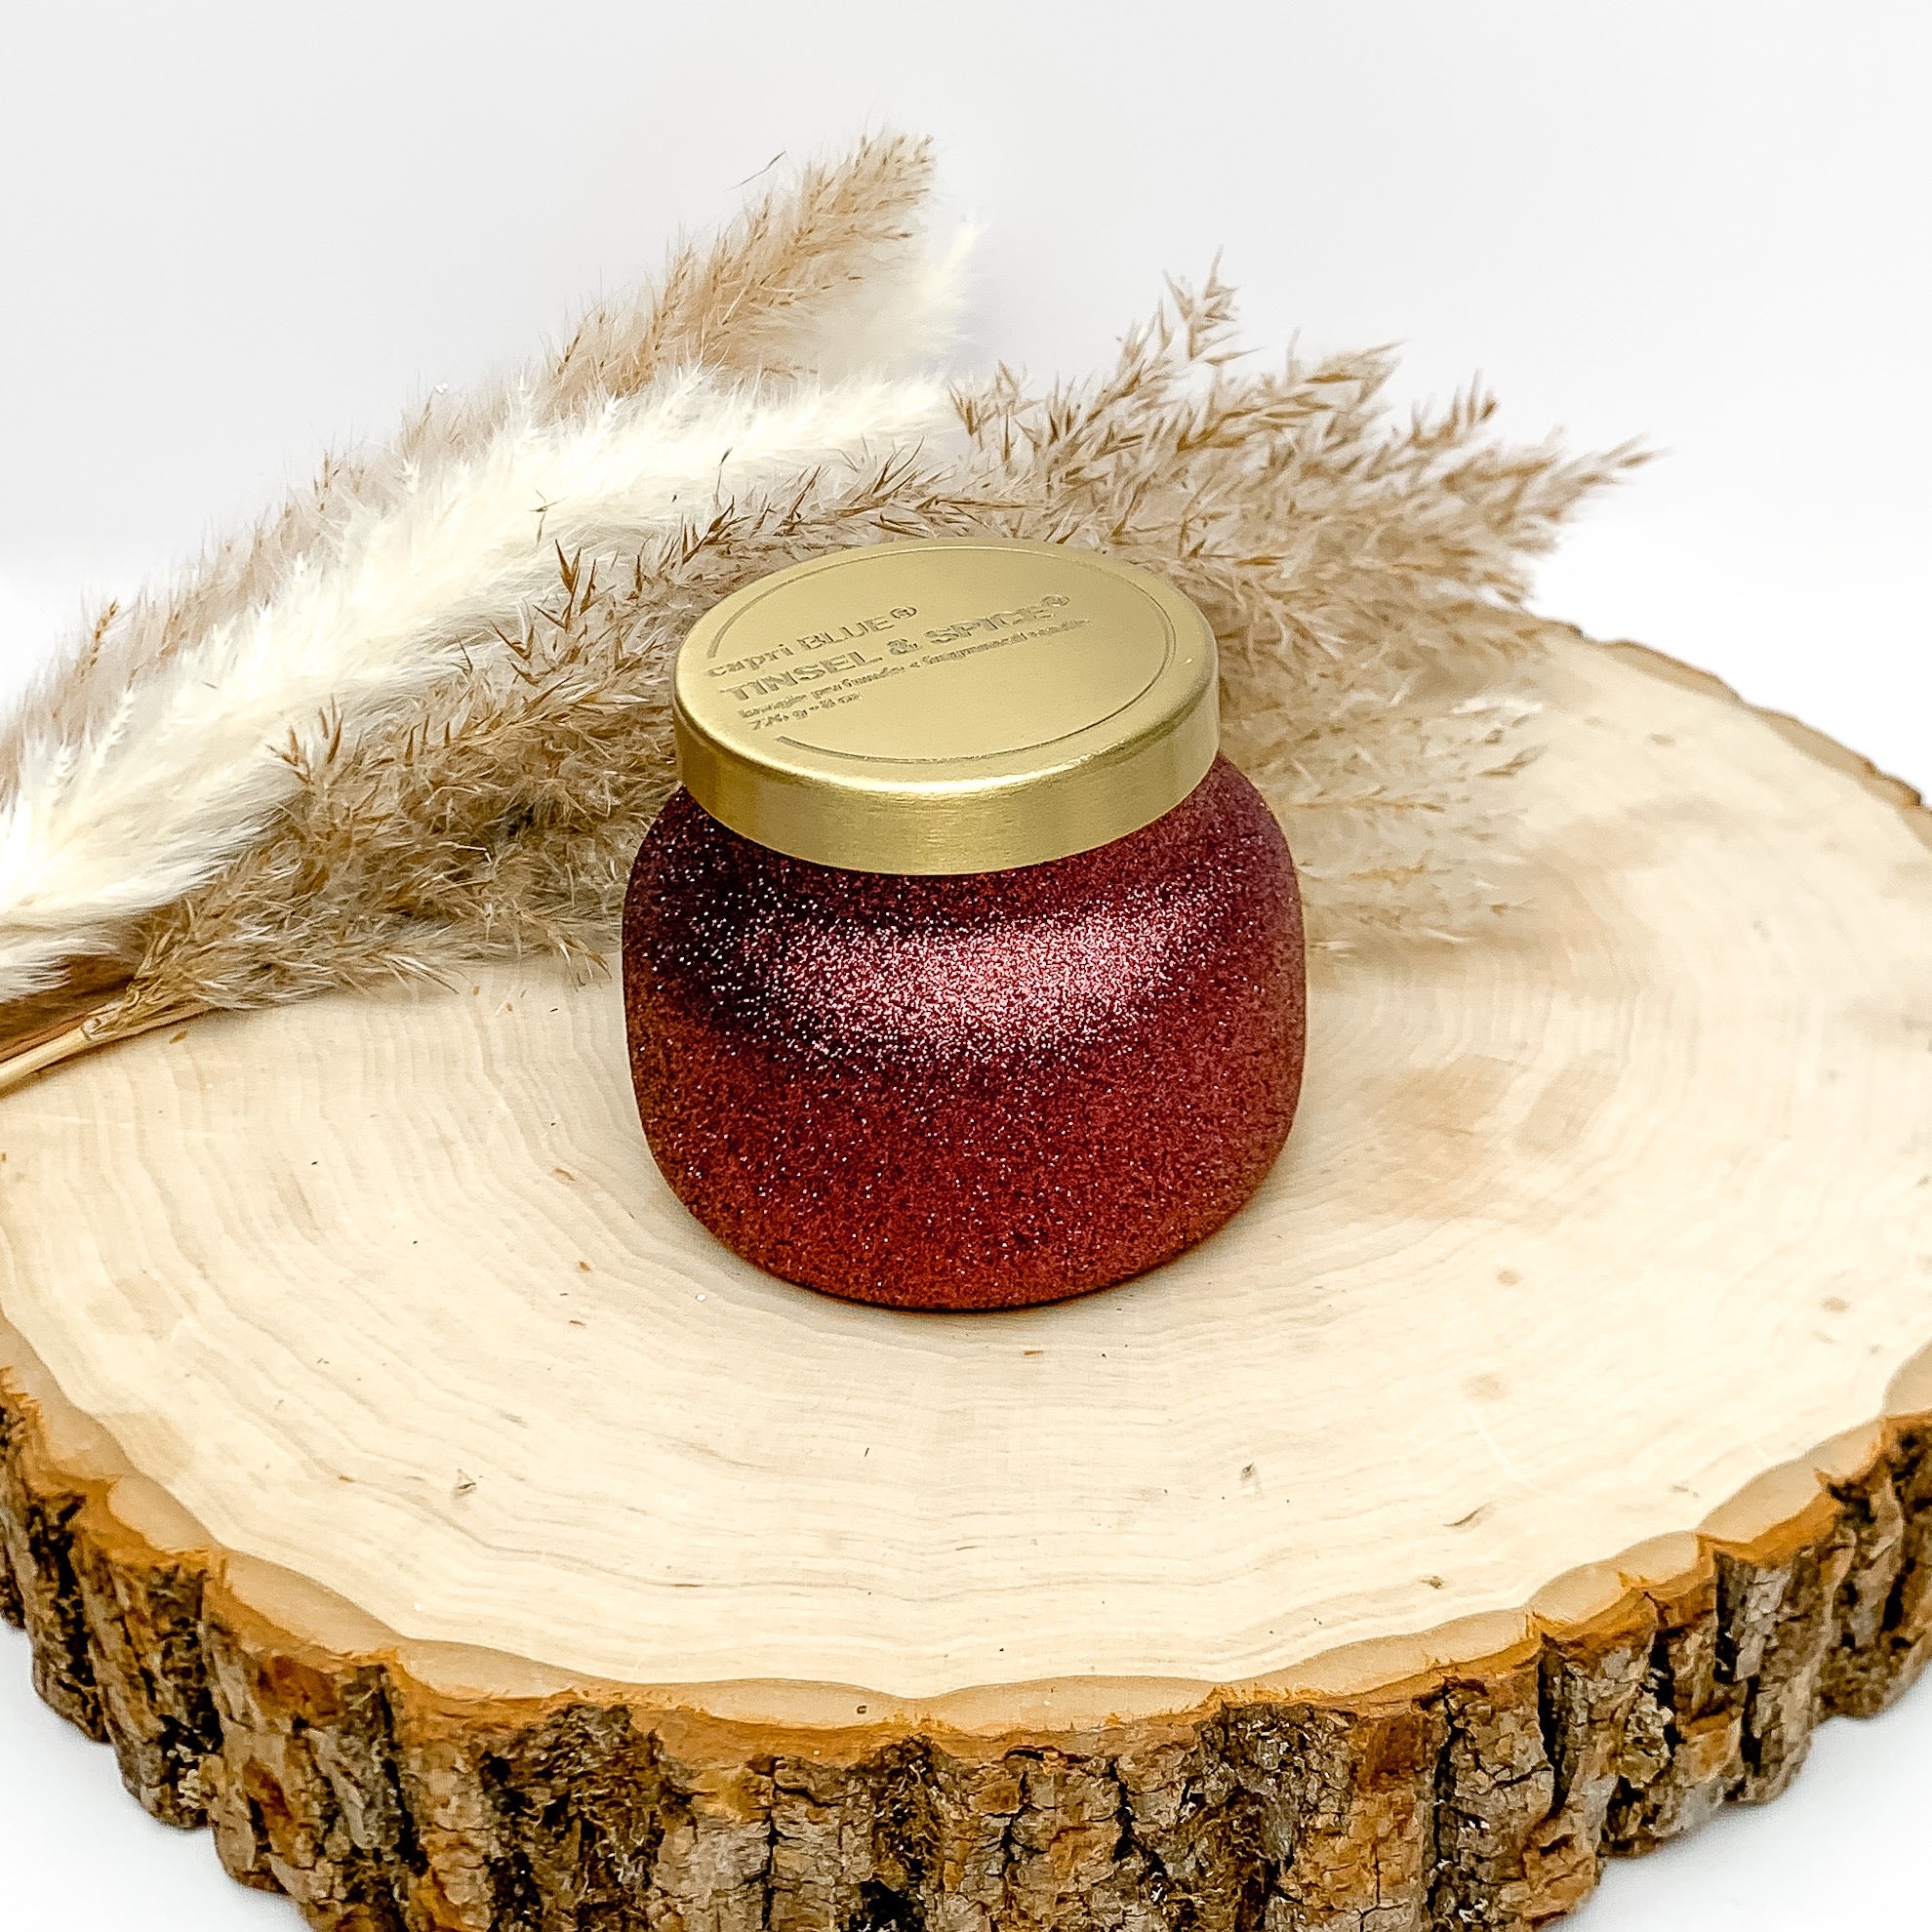 Capri blue 8 oz. jar candle in maroon glitter. The scent of this canfdle is tinsel and spice. The candle is sitting on a wood piece with feathers behind it. The background of the picture is white.